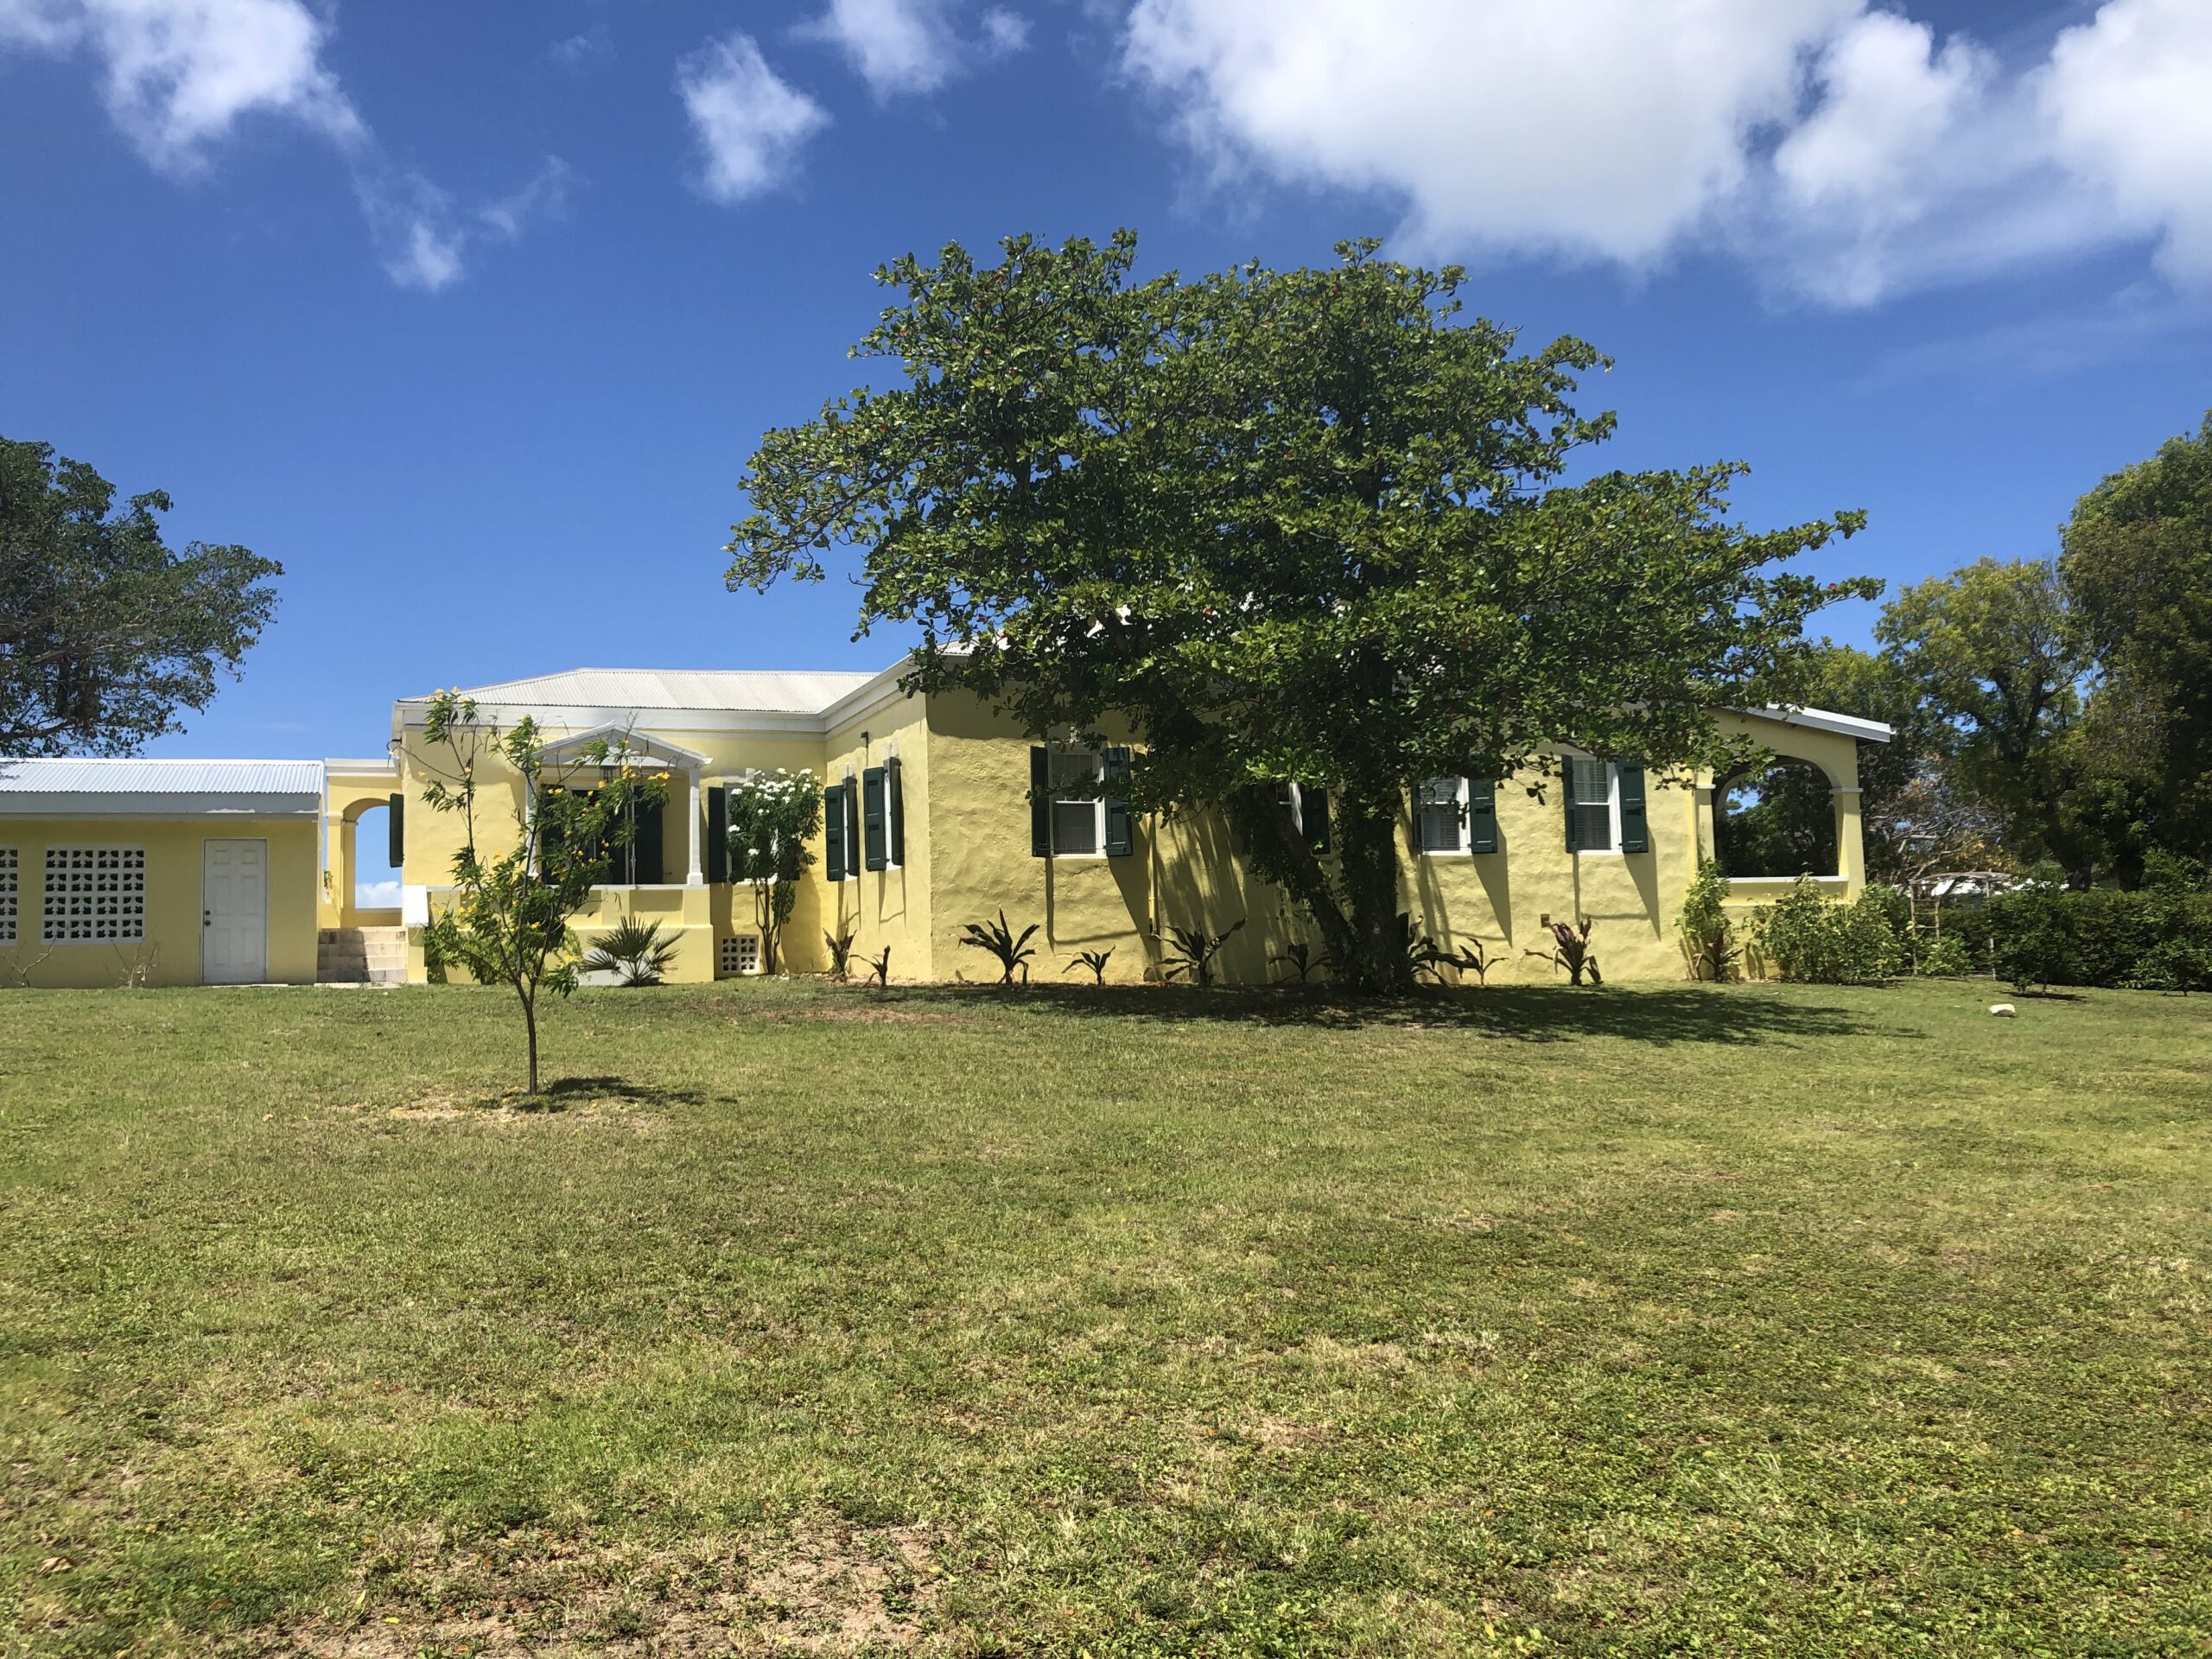 New Home for St. Croix Animal Welfare Center | St. Thomas Source